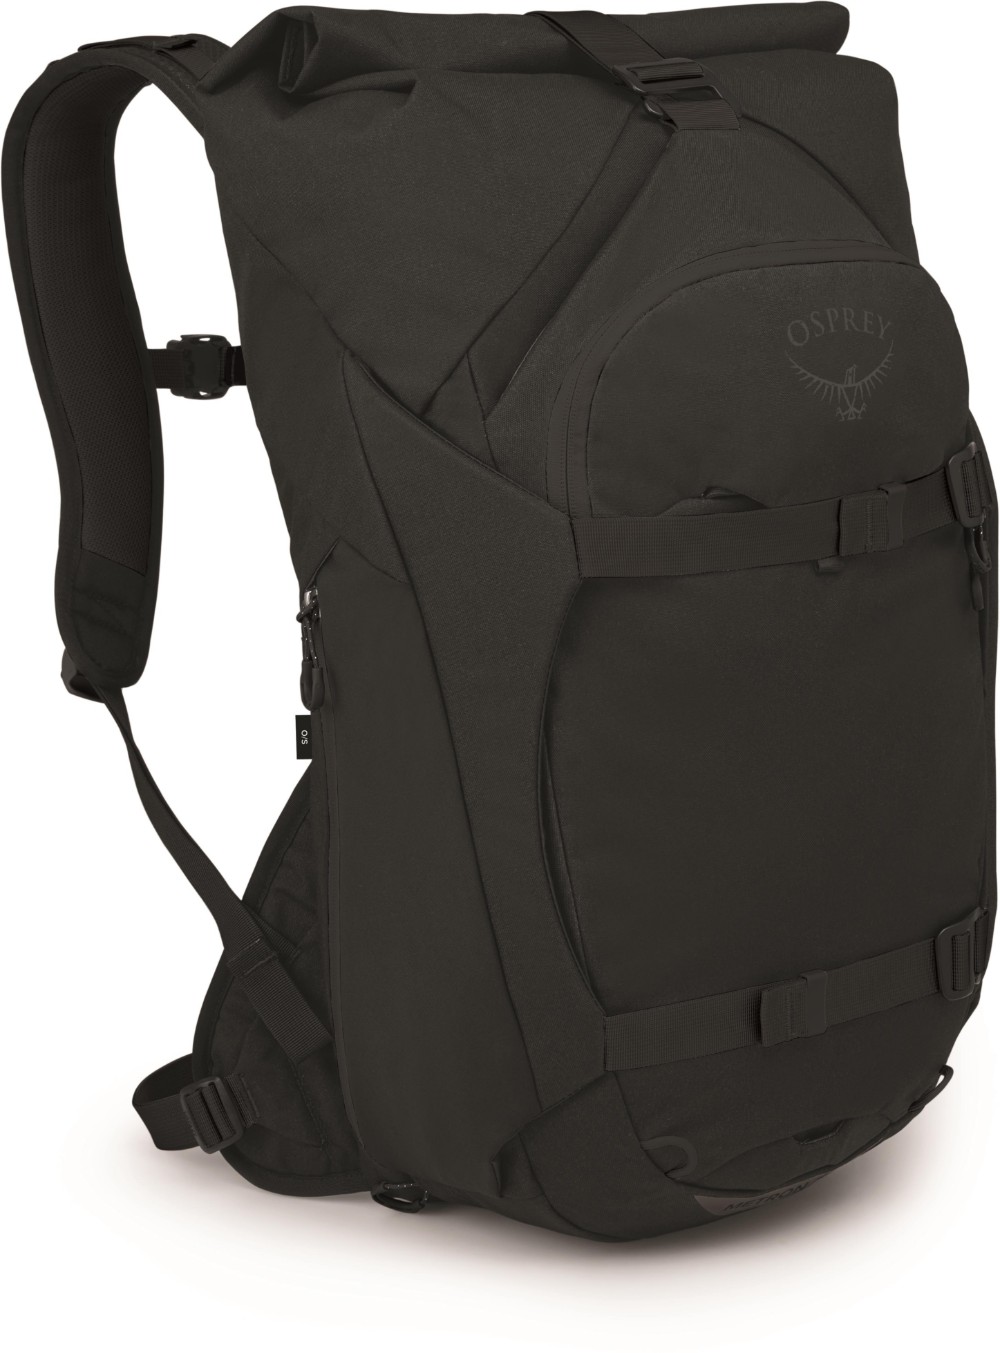 Metron 22 Roll Top Backpack image 0